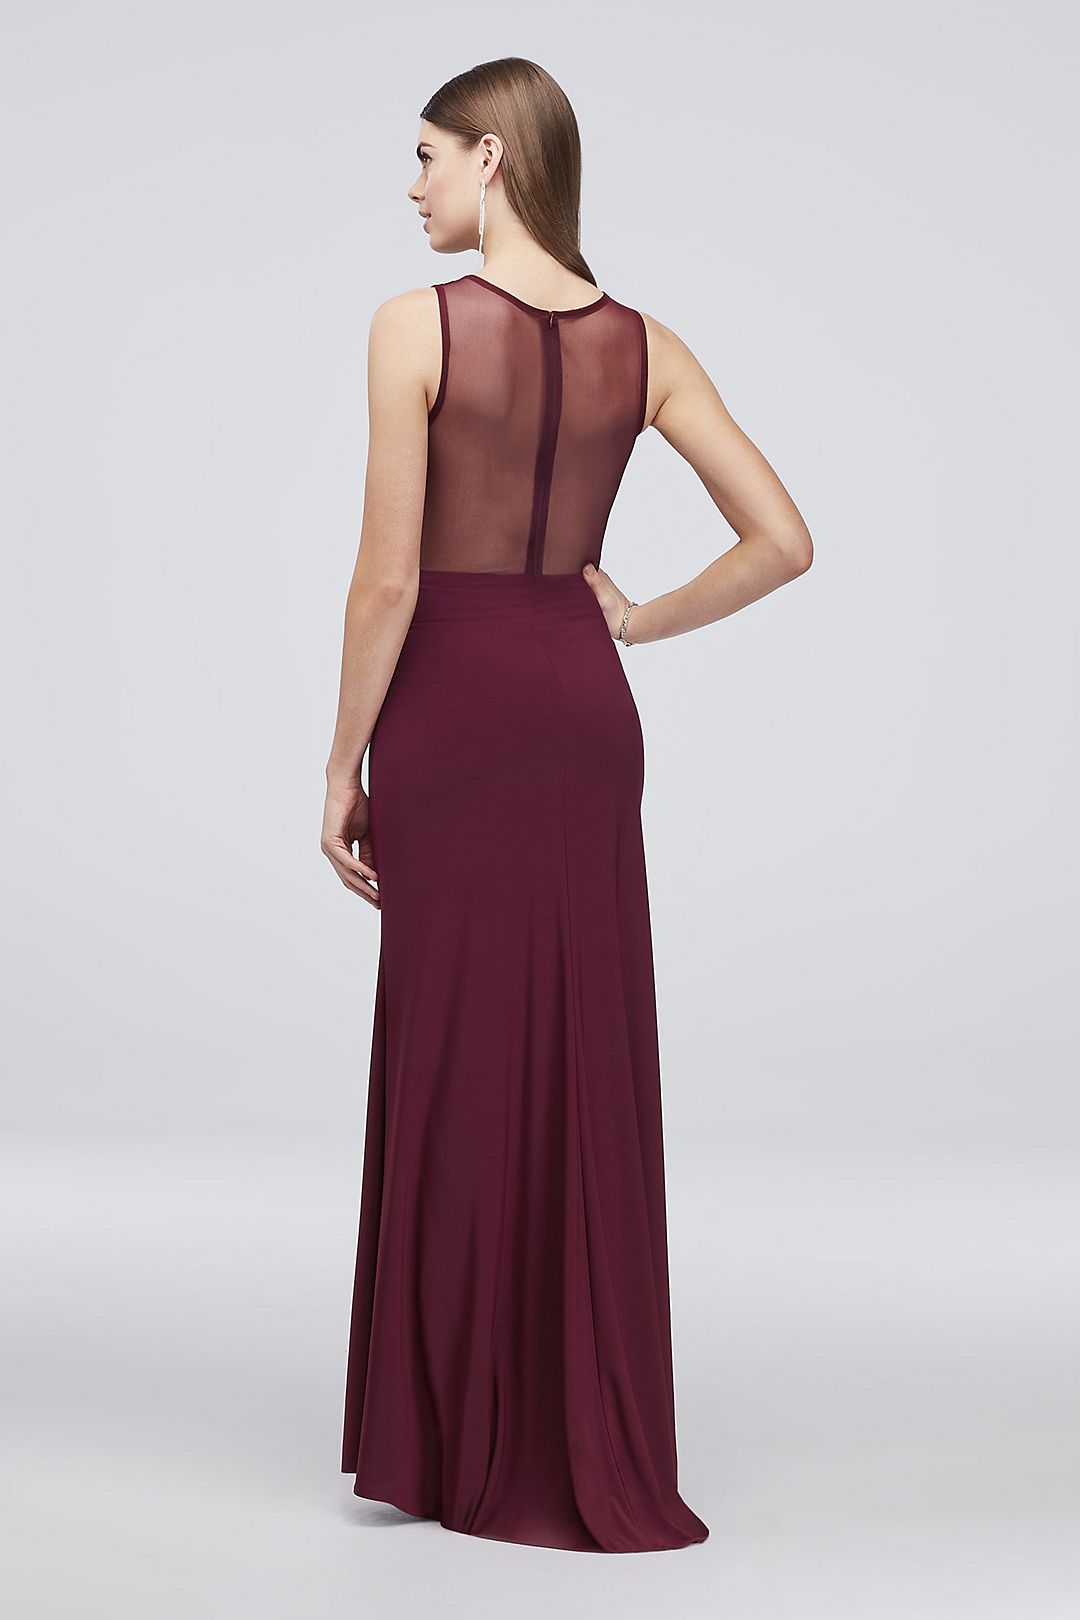 Beaded Jersey Tank Dress with Illusion Back Image 2